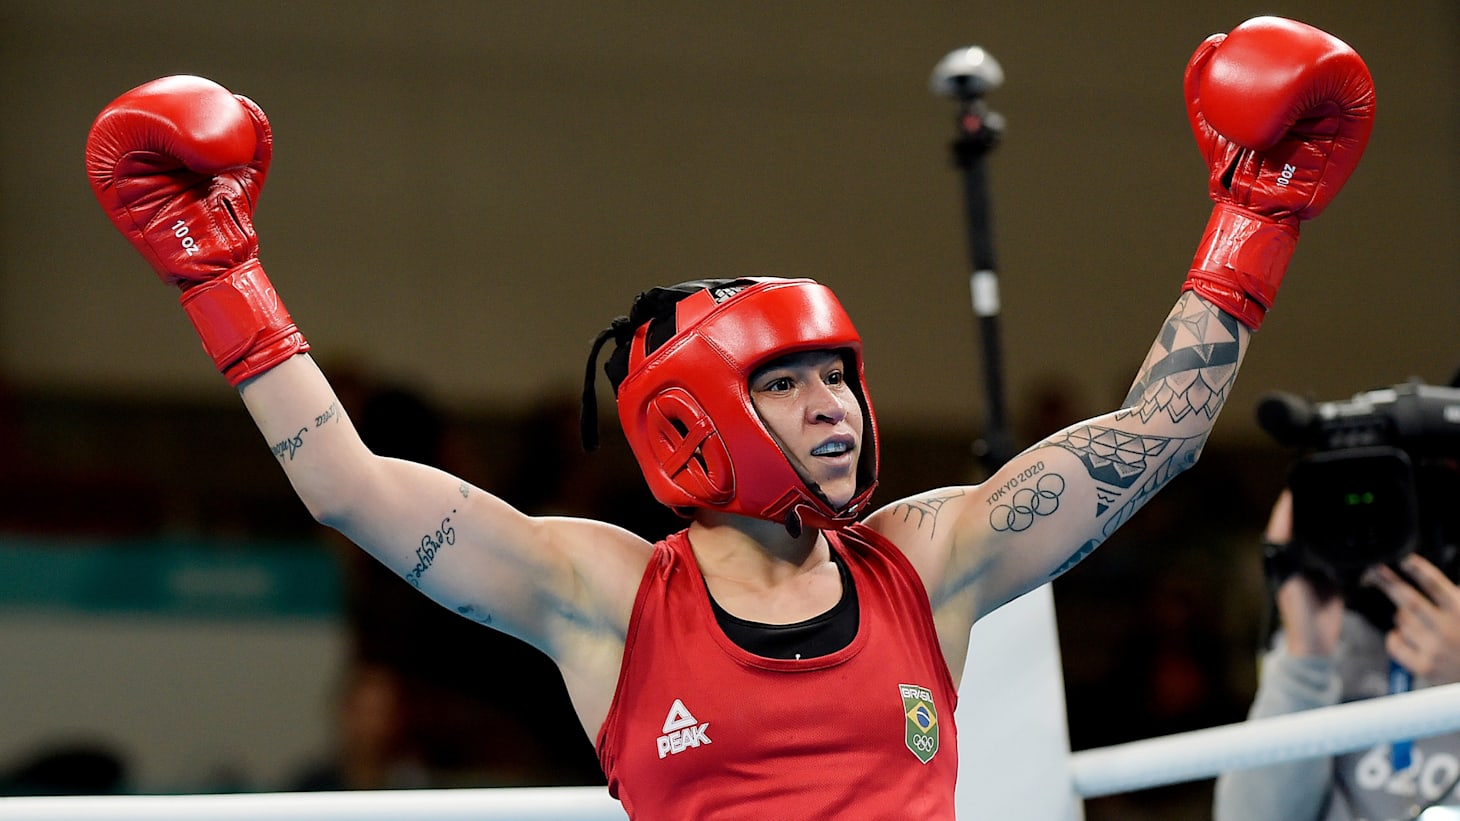 Pan Am Games 2023 - From Cuba to Canada: Discover the training regimes of  elite boxers